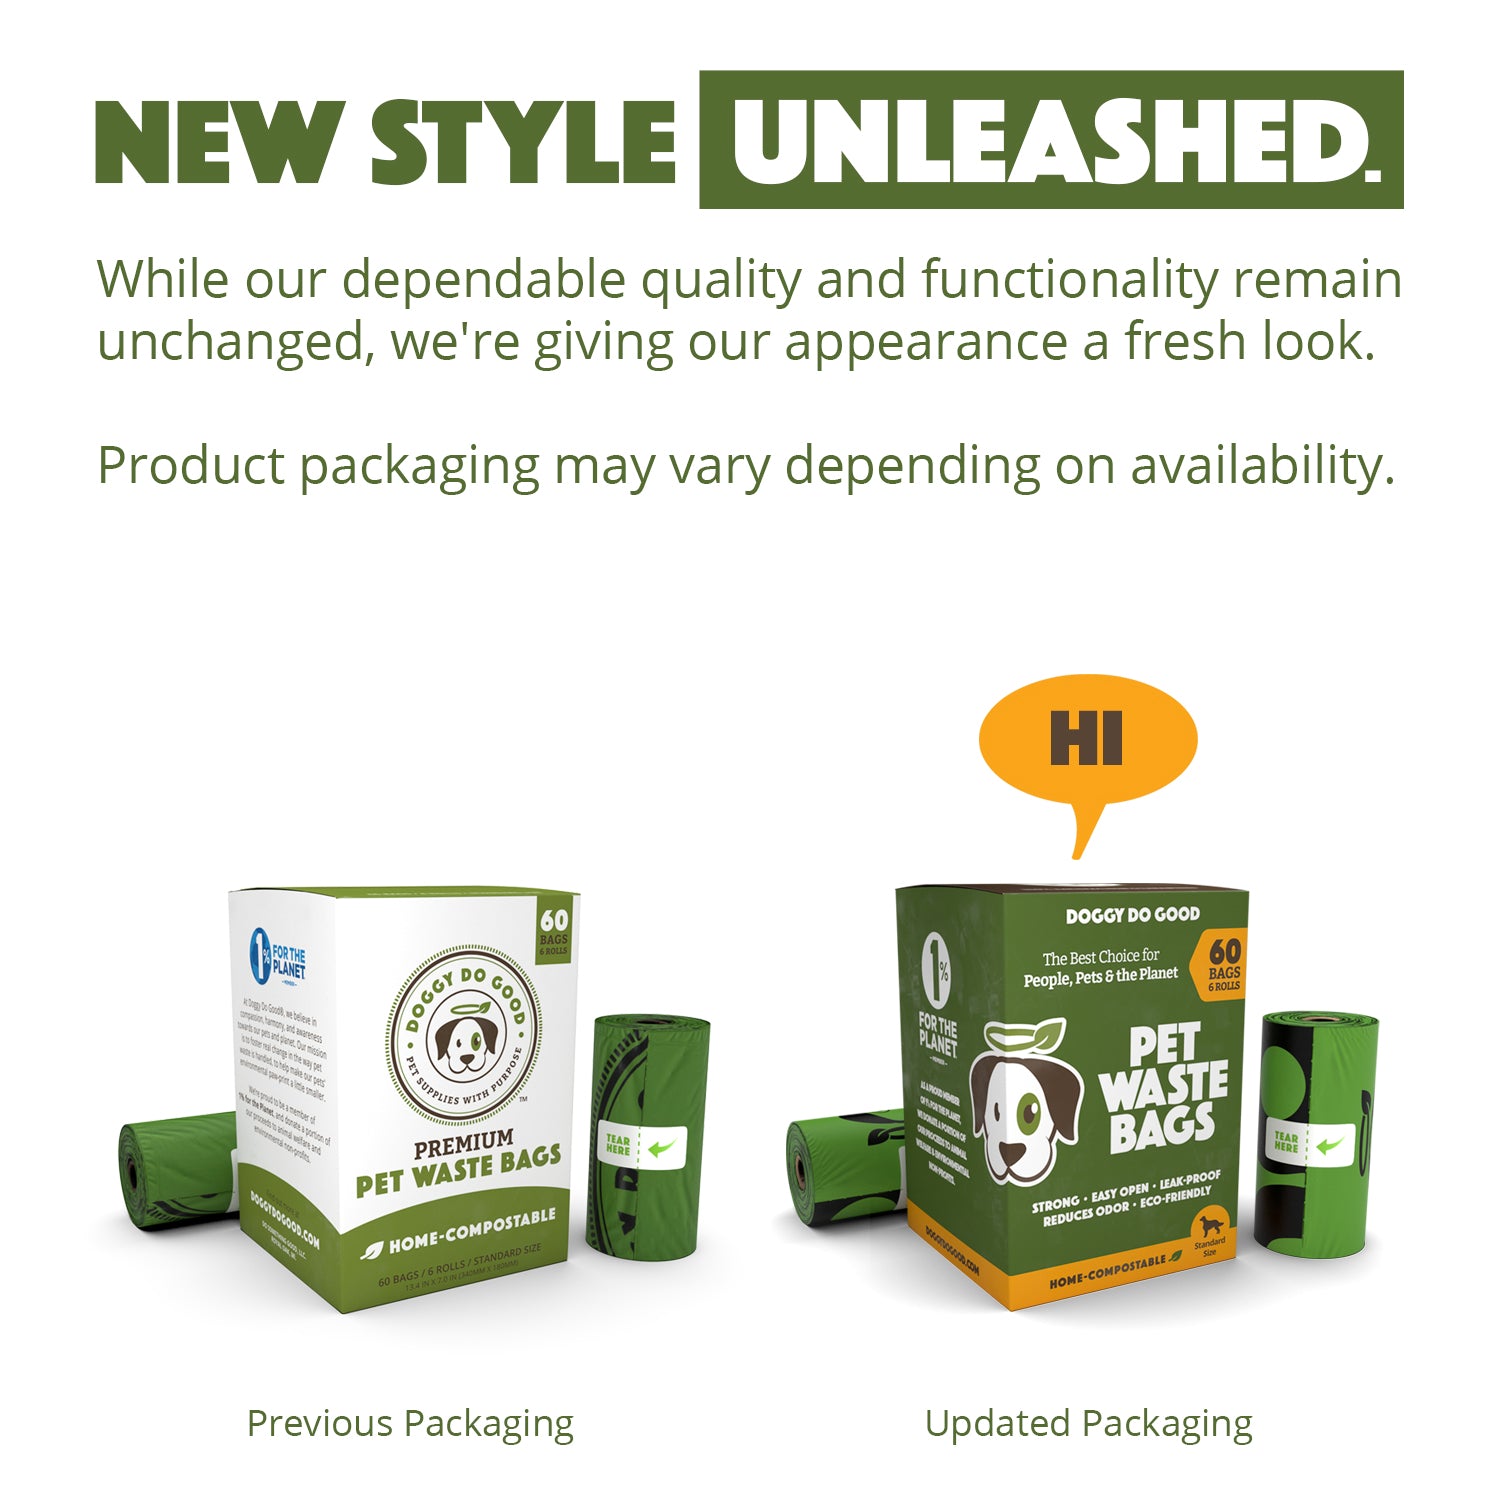 Compostable Pet Waste Bags - 60 Bags